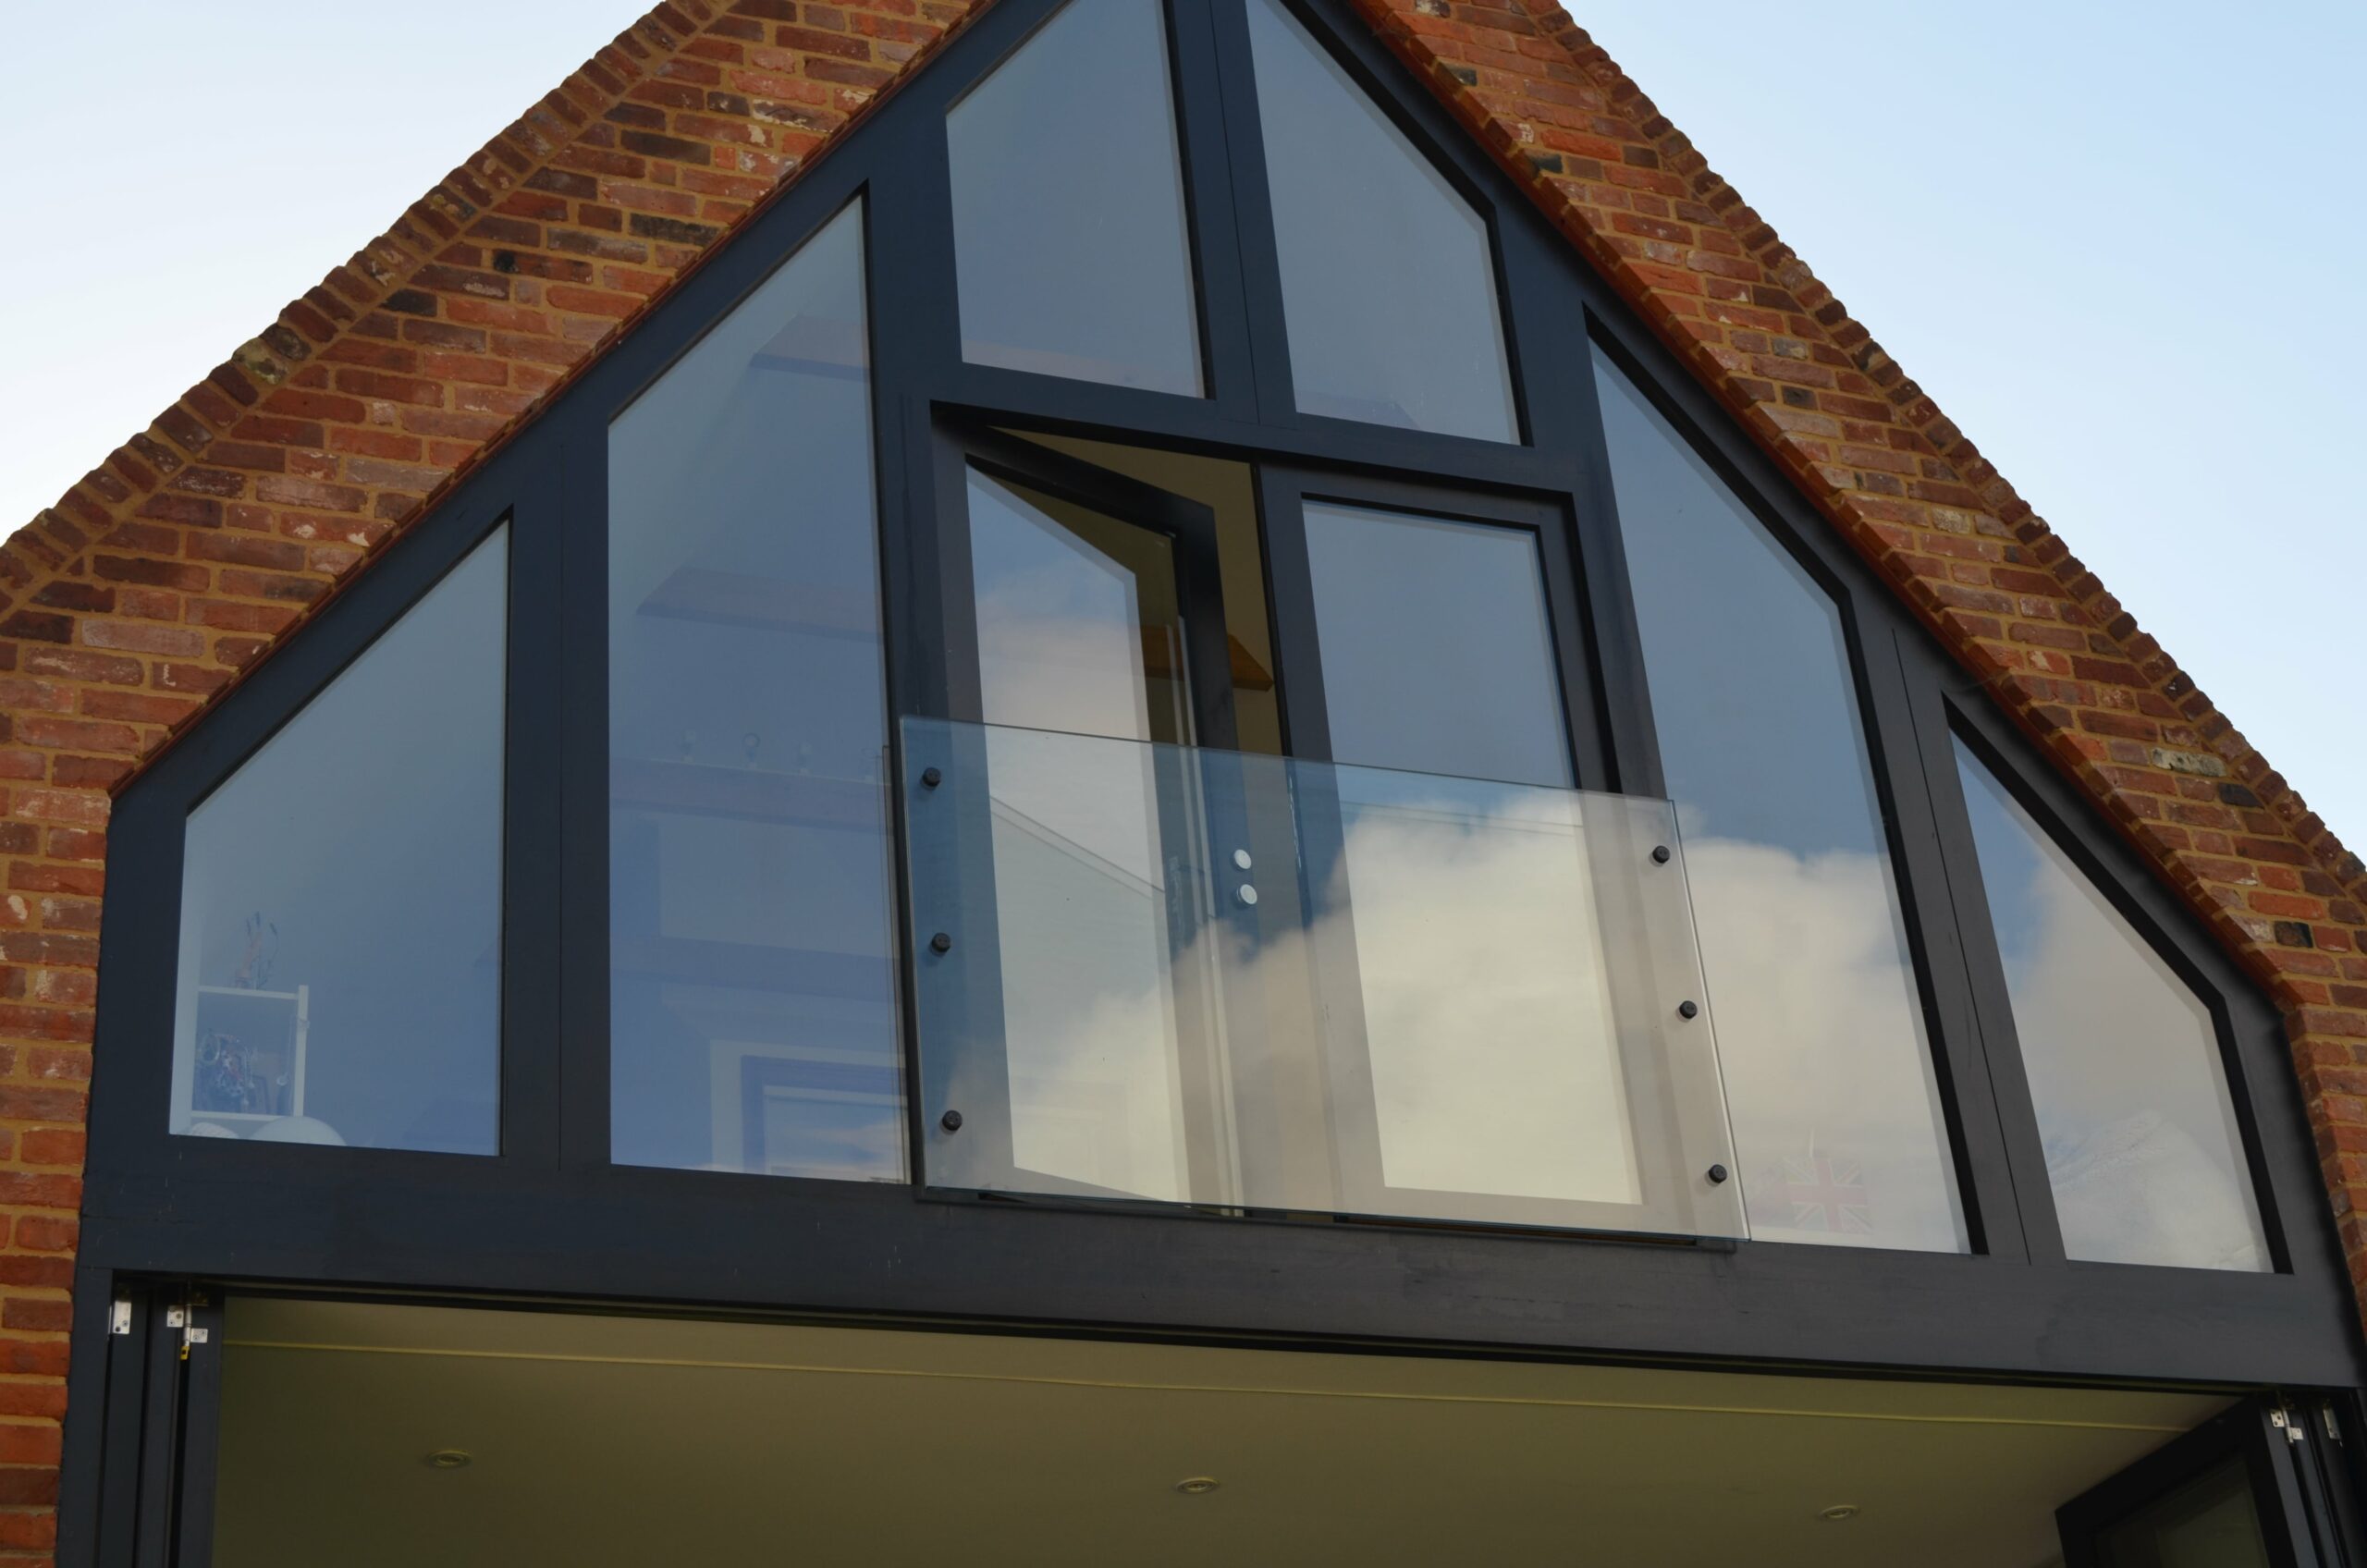 attic conversion floor to ceiling glass panel windows and doors with juliet balcony